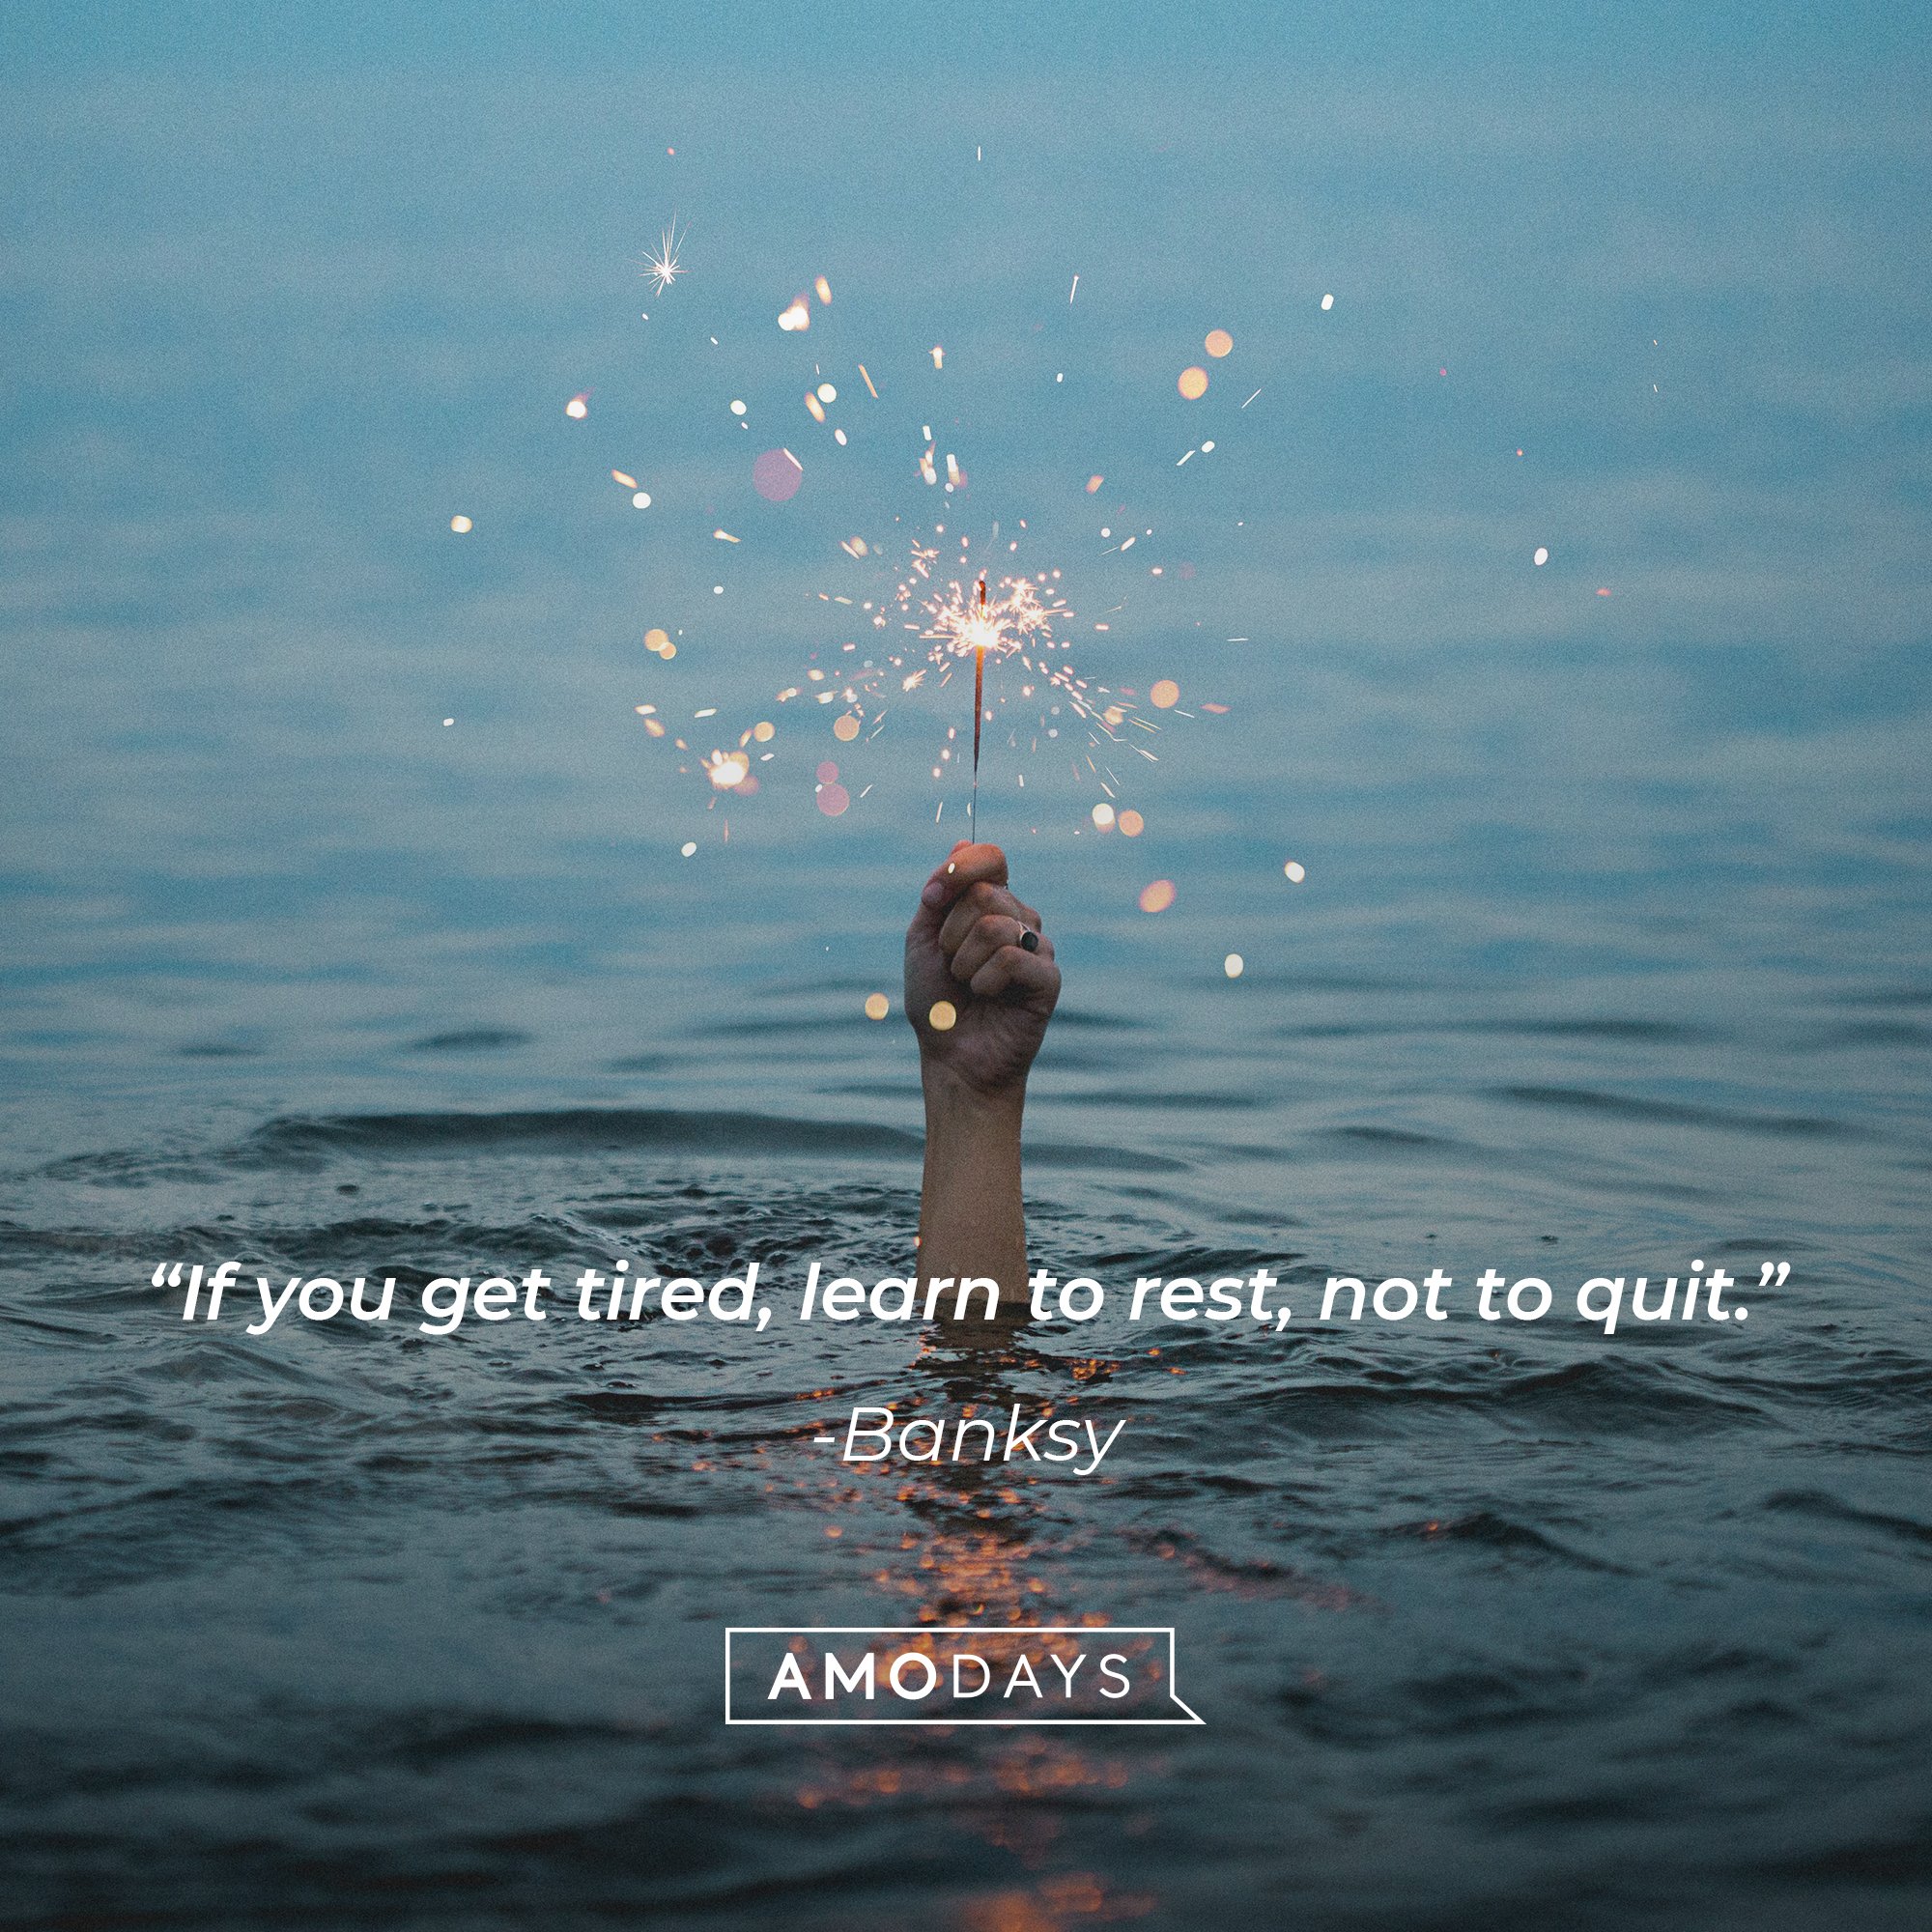 Banksy's quote: "If you get tired, learn to rest, not to quit." | Image: AmoDays